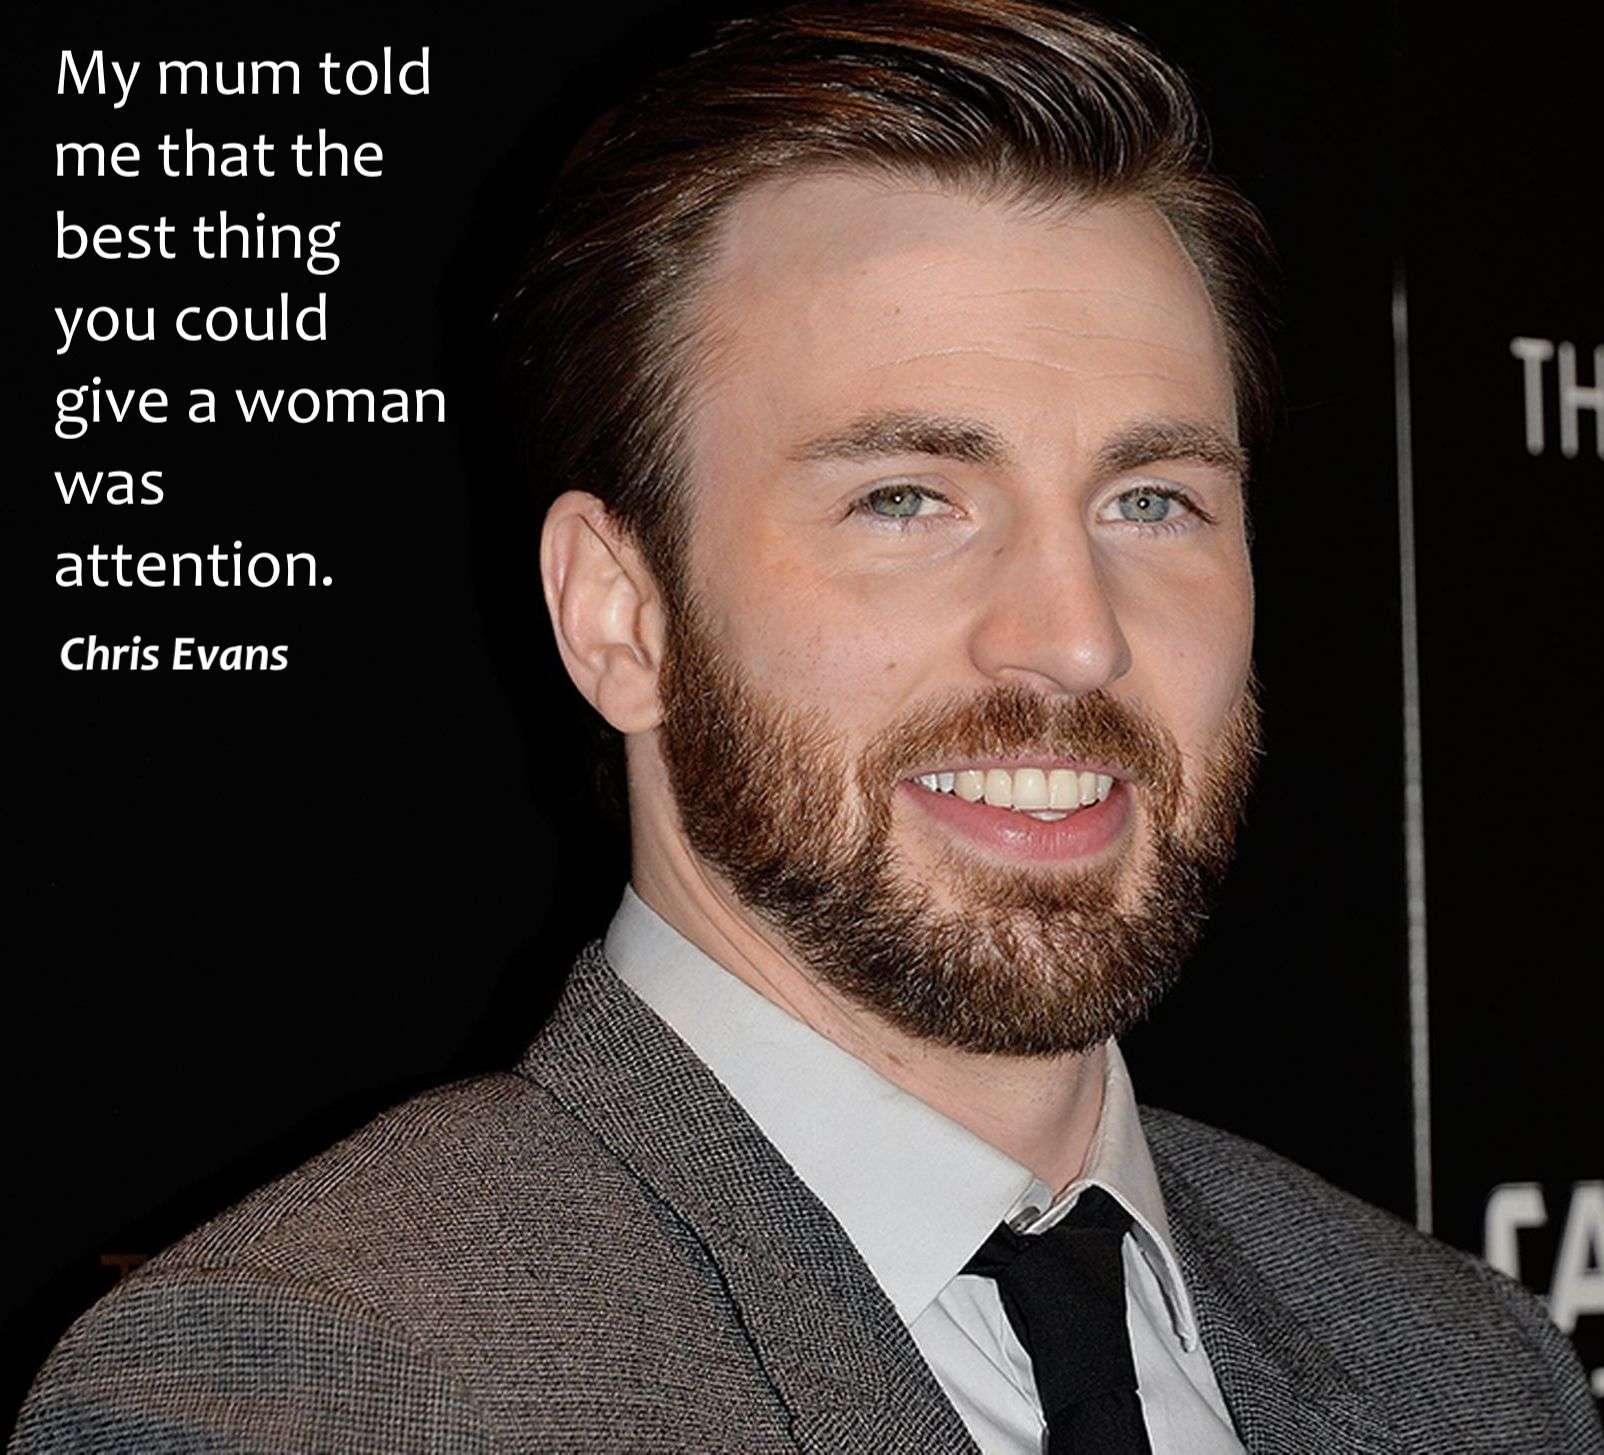 Chris Evans Qoutes / Some best quotes of Chris Evans - YouTube